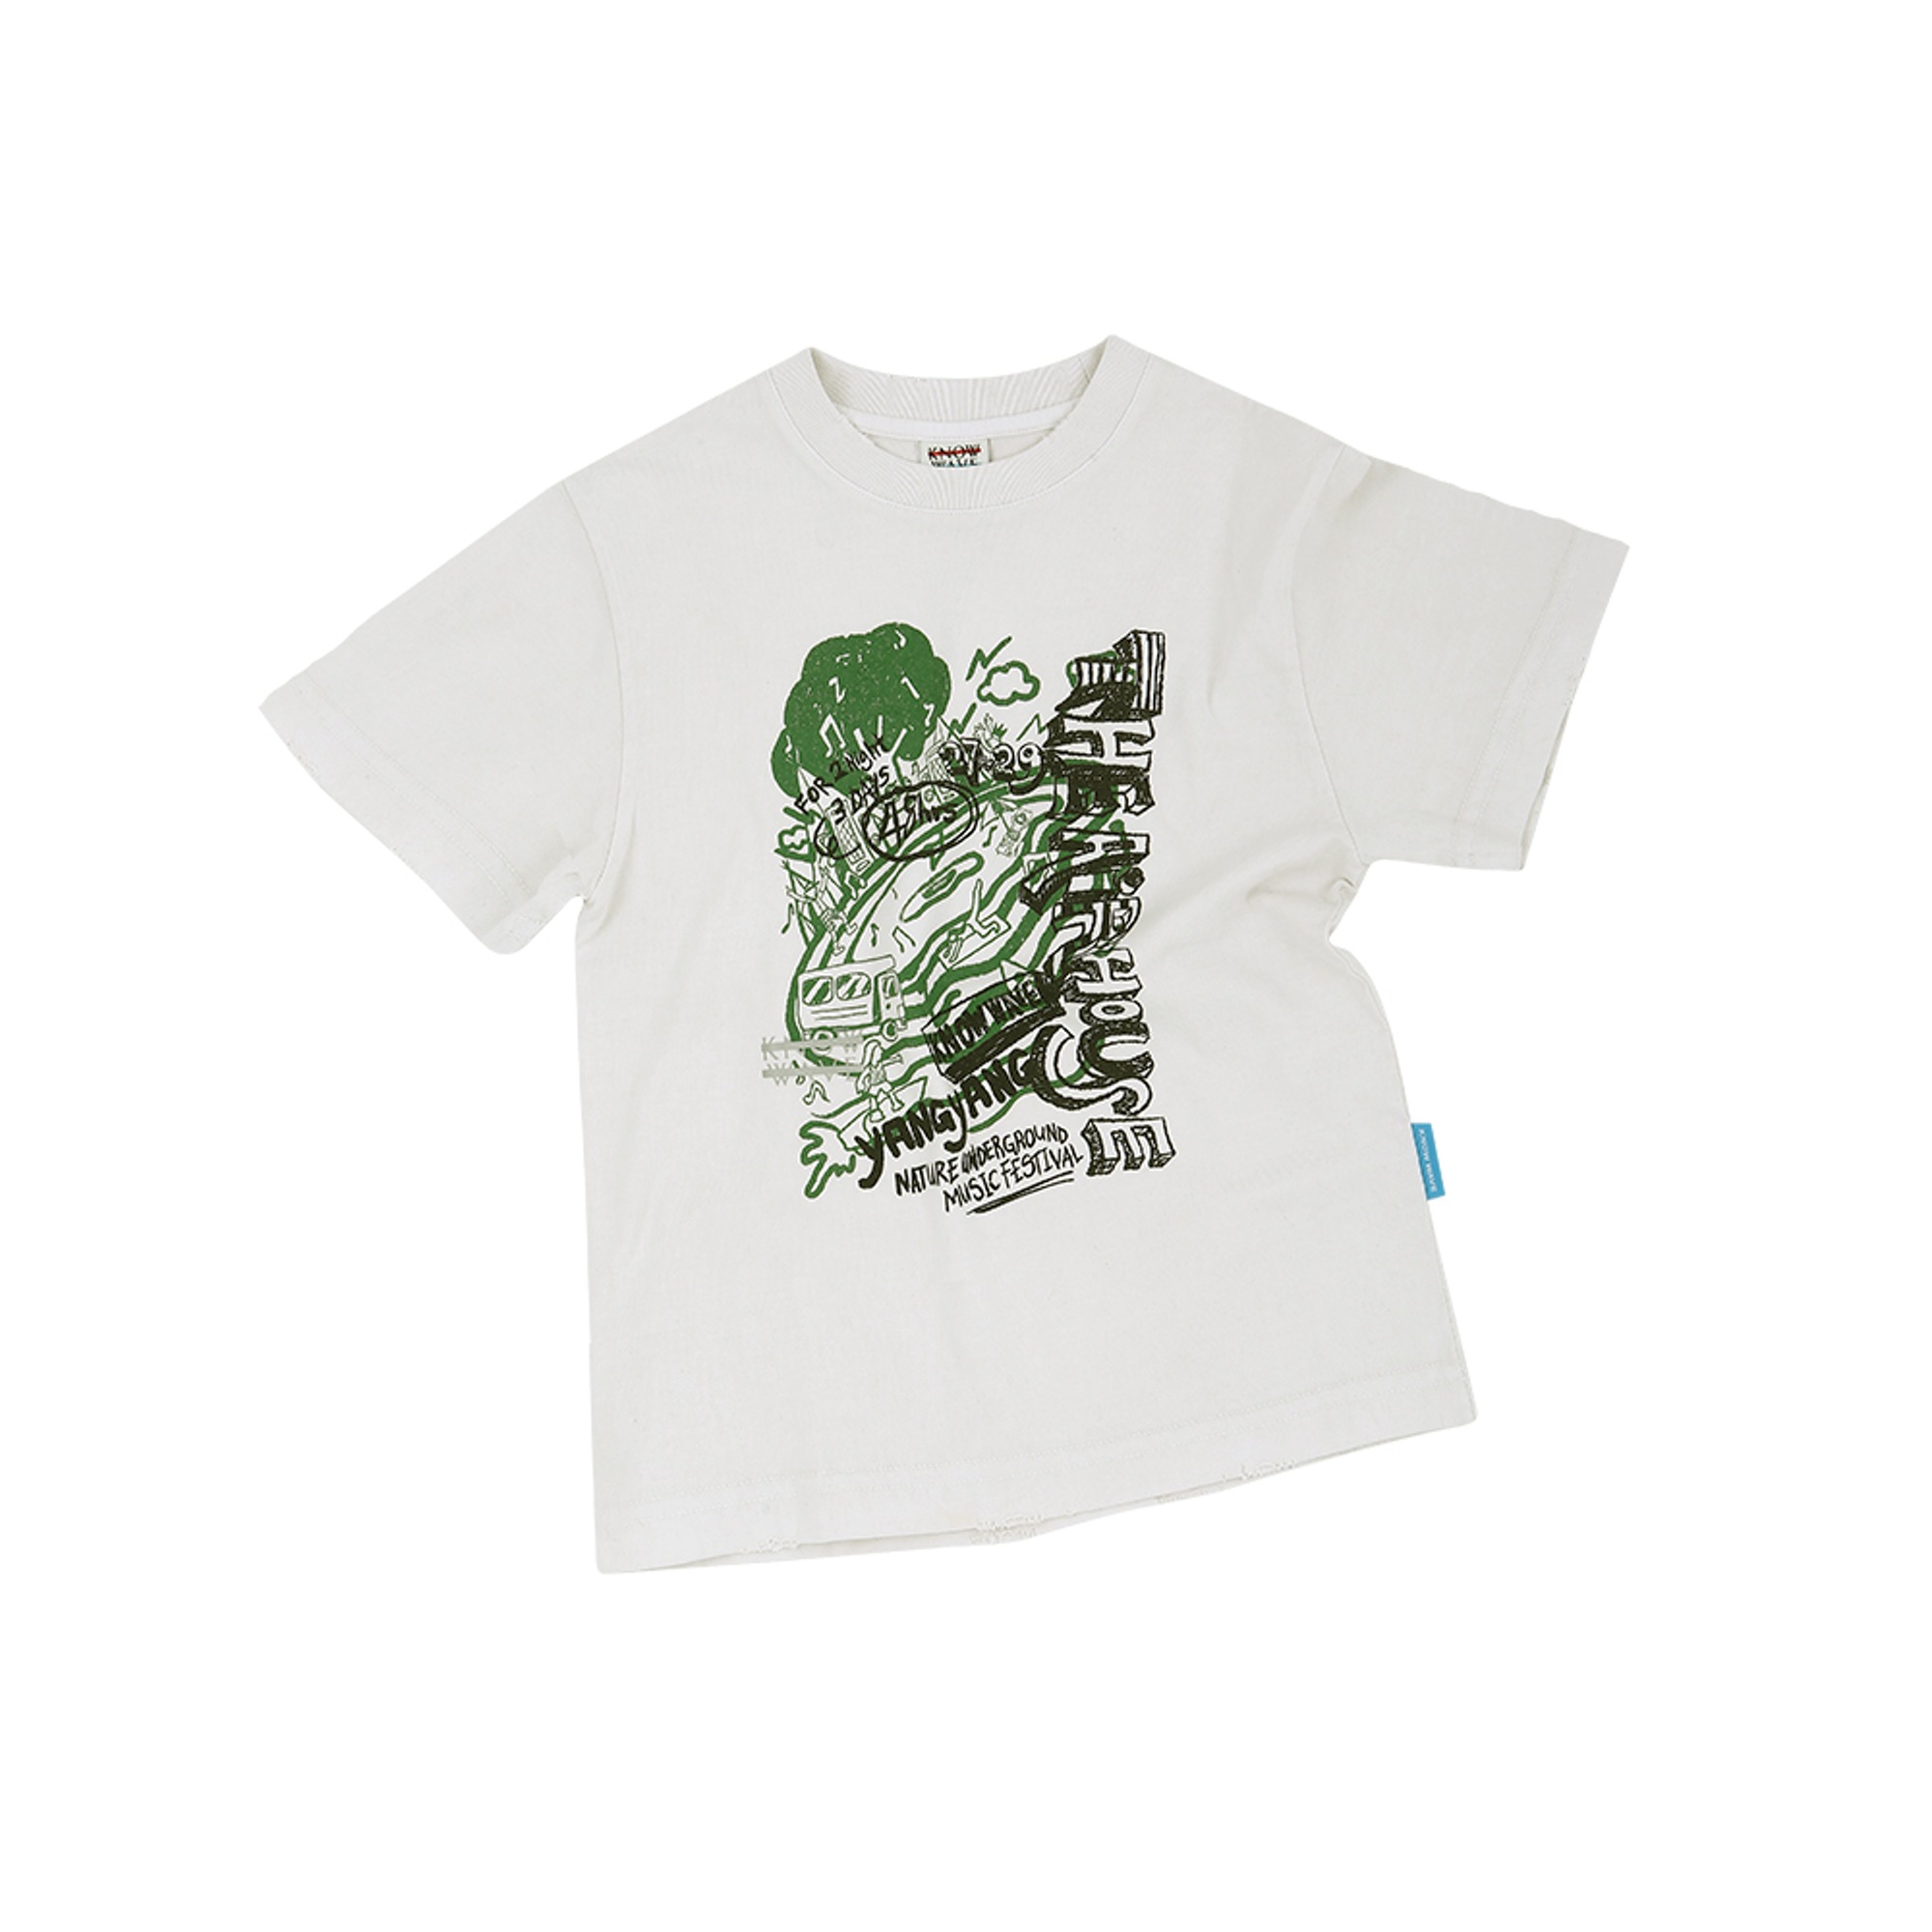 KNOW WAVE X THE AIR HOUSE GRAPHIC T SHIRTS KNT071u(WHITE)